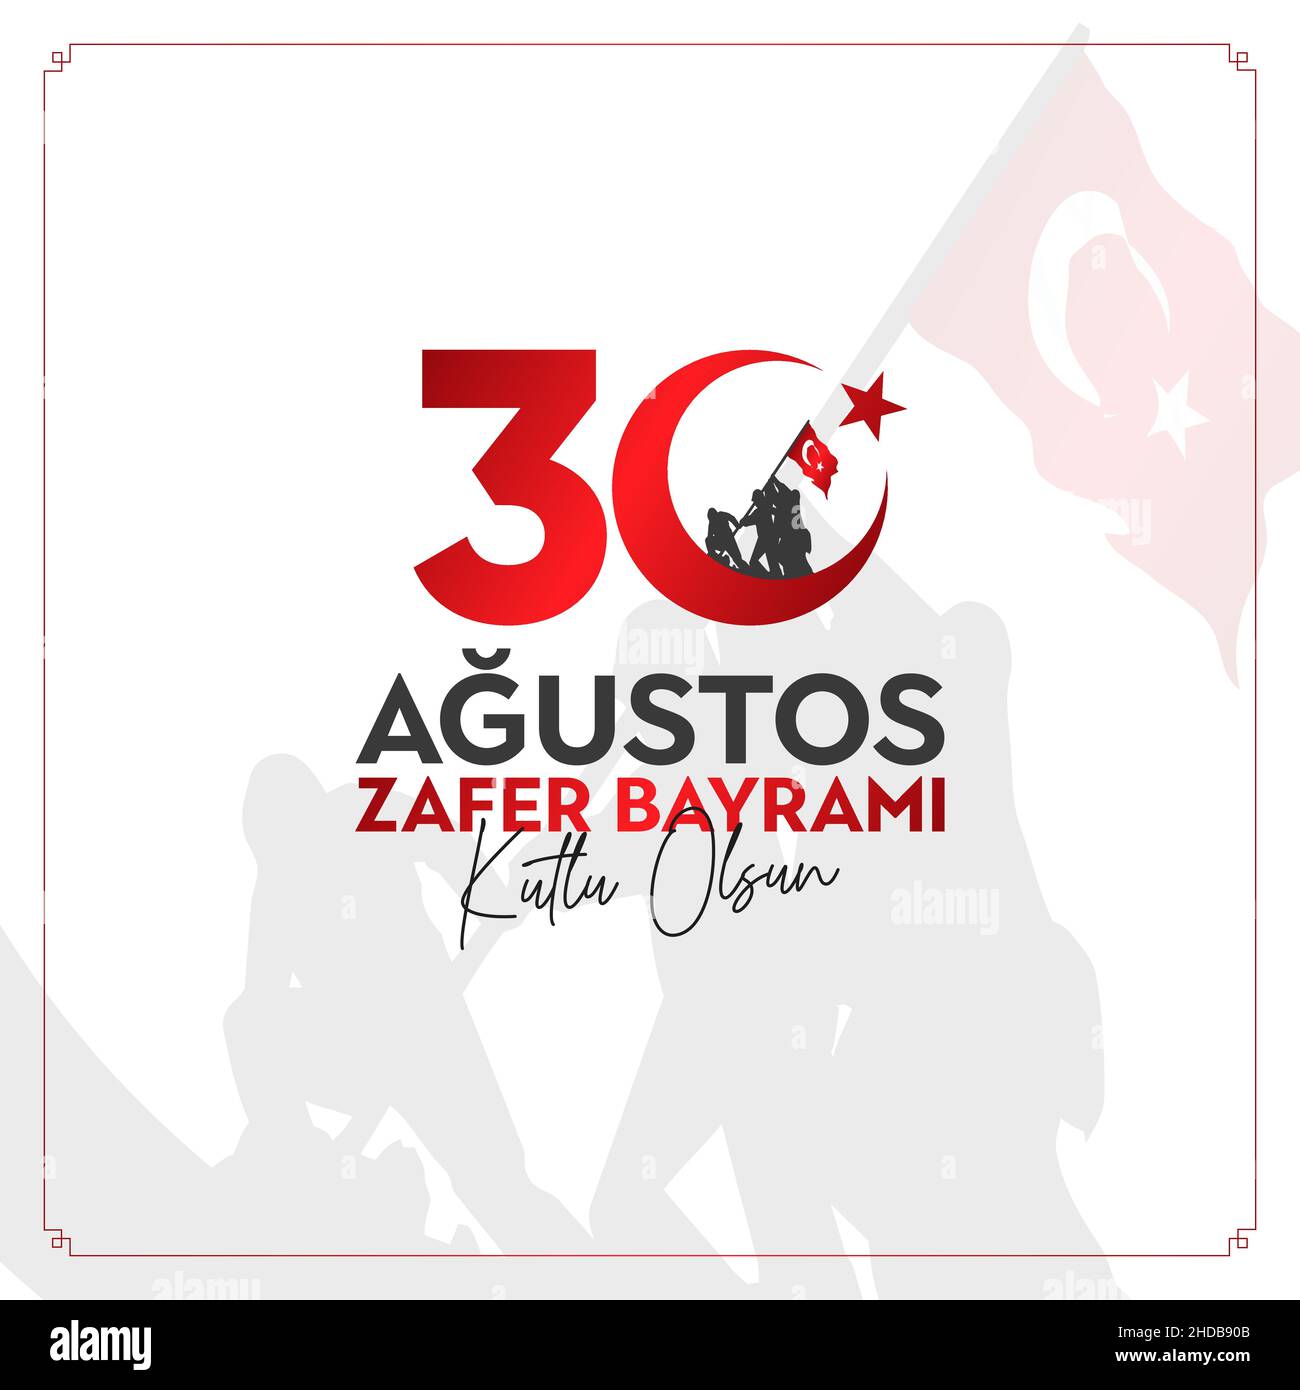 30 Agustos Zafer Bayrami Kutlu Olsun. August 30 celebration of victory and the National Day in Turkey. Stock Vector